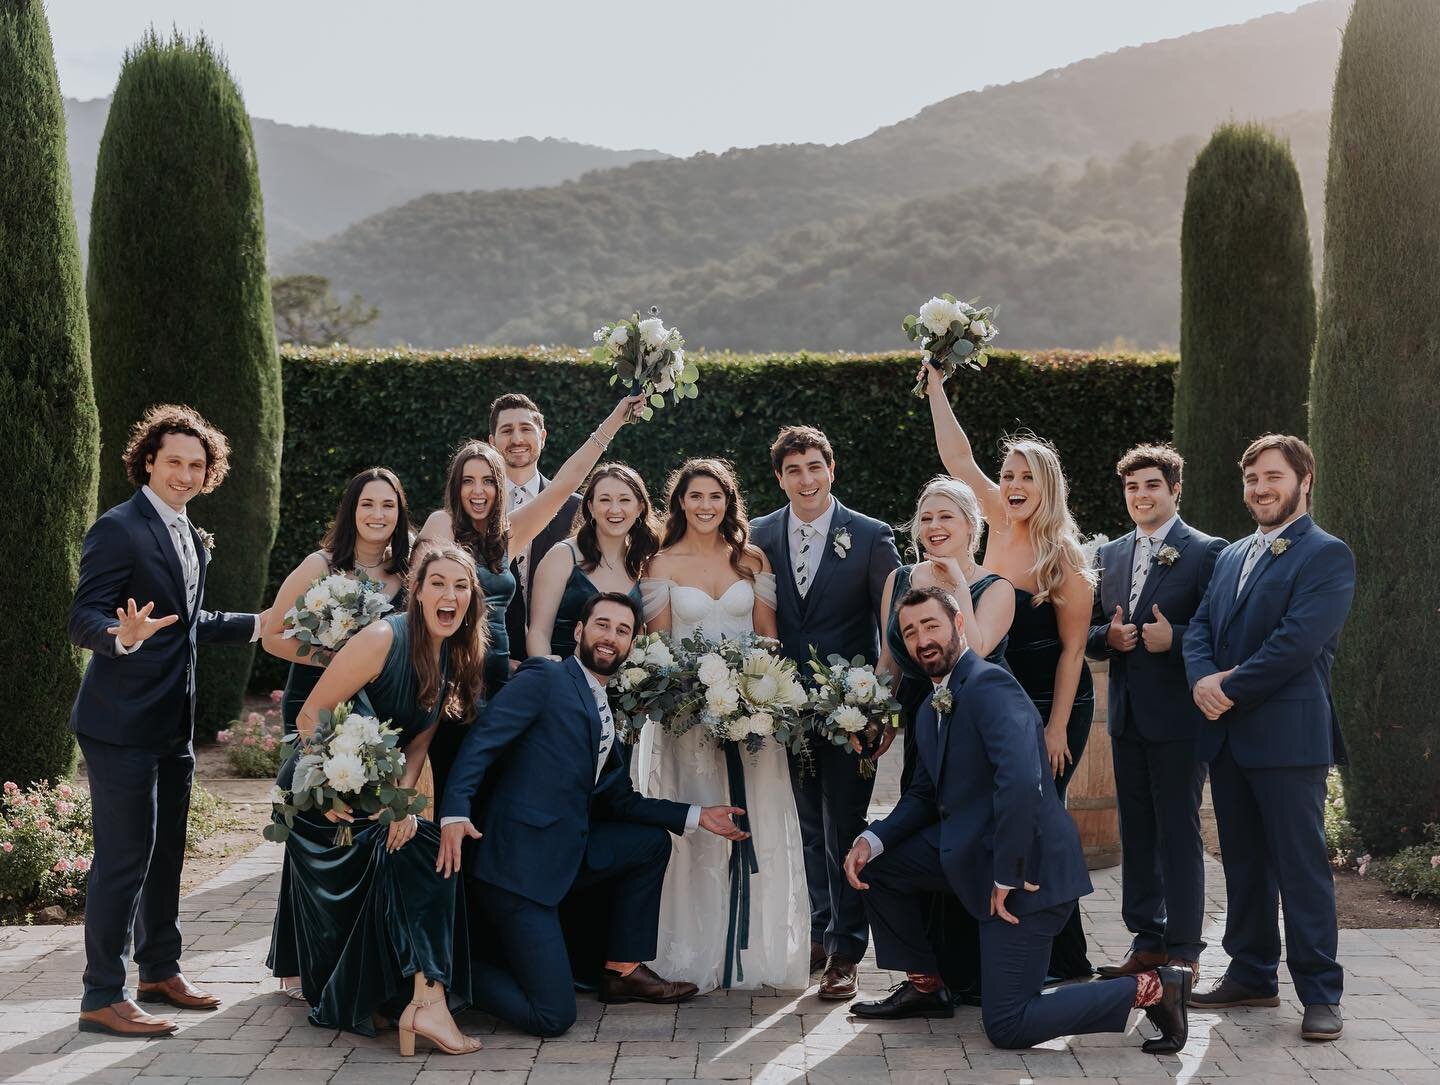 Loving this fun wedding party shot from Anne and Connor's beautiful Carmel Valley wedding last fall. I always recommend some off the cuff shots in addition to formals, really sets the tone for the celebration ahead!
.
.
.
Photography: @kassandrathoms